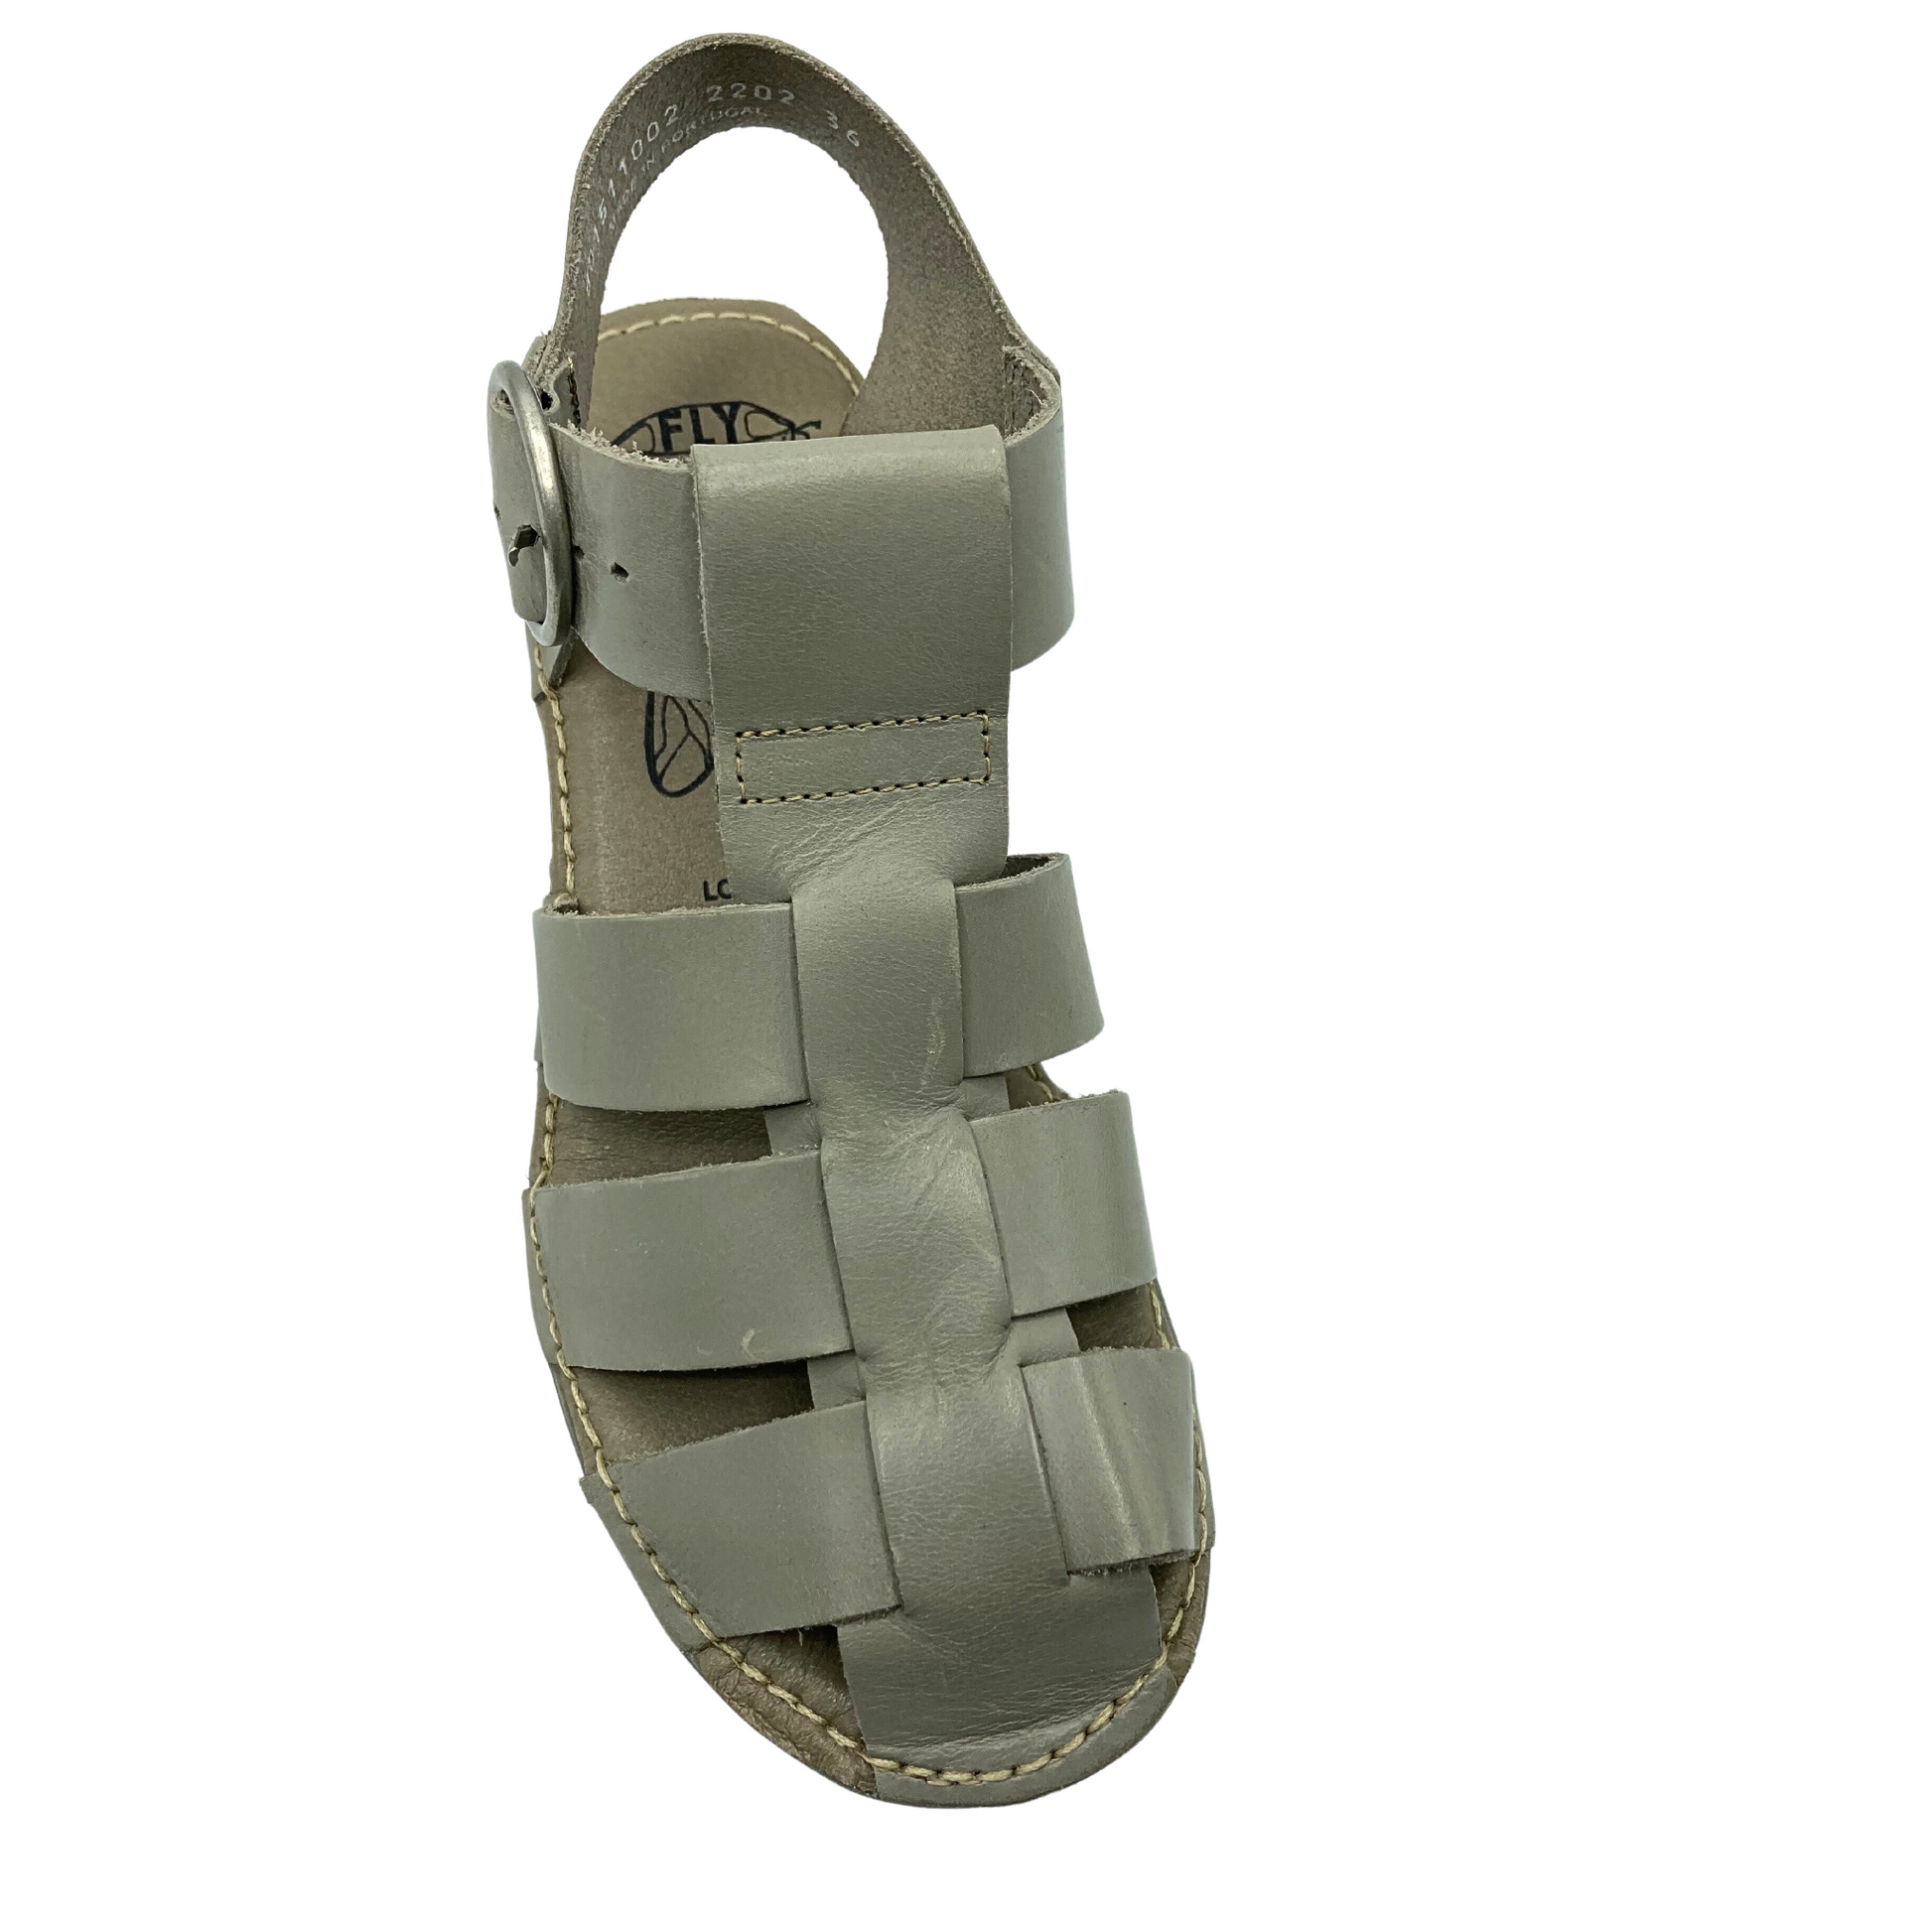 Top down view of a fisherman style sandal in a taupe/gray color